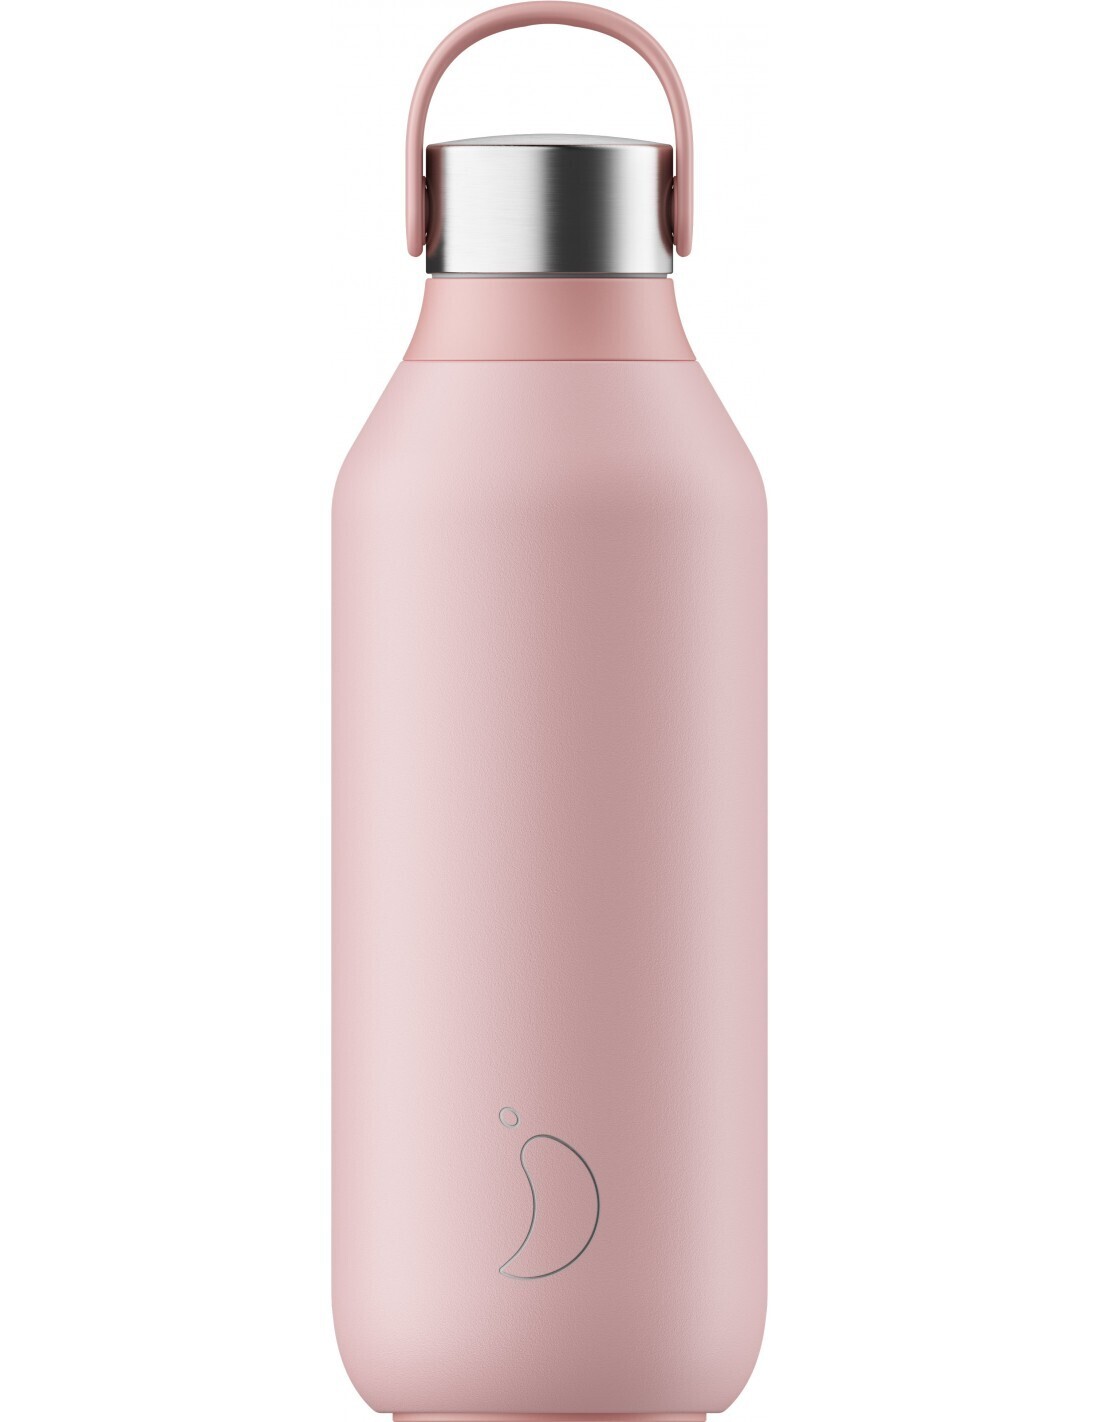 Chilly's Series 2 Bottle Blush Pink 500ml